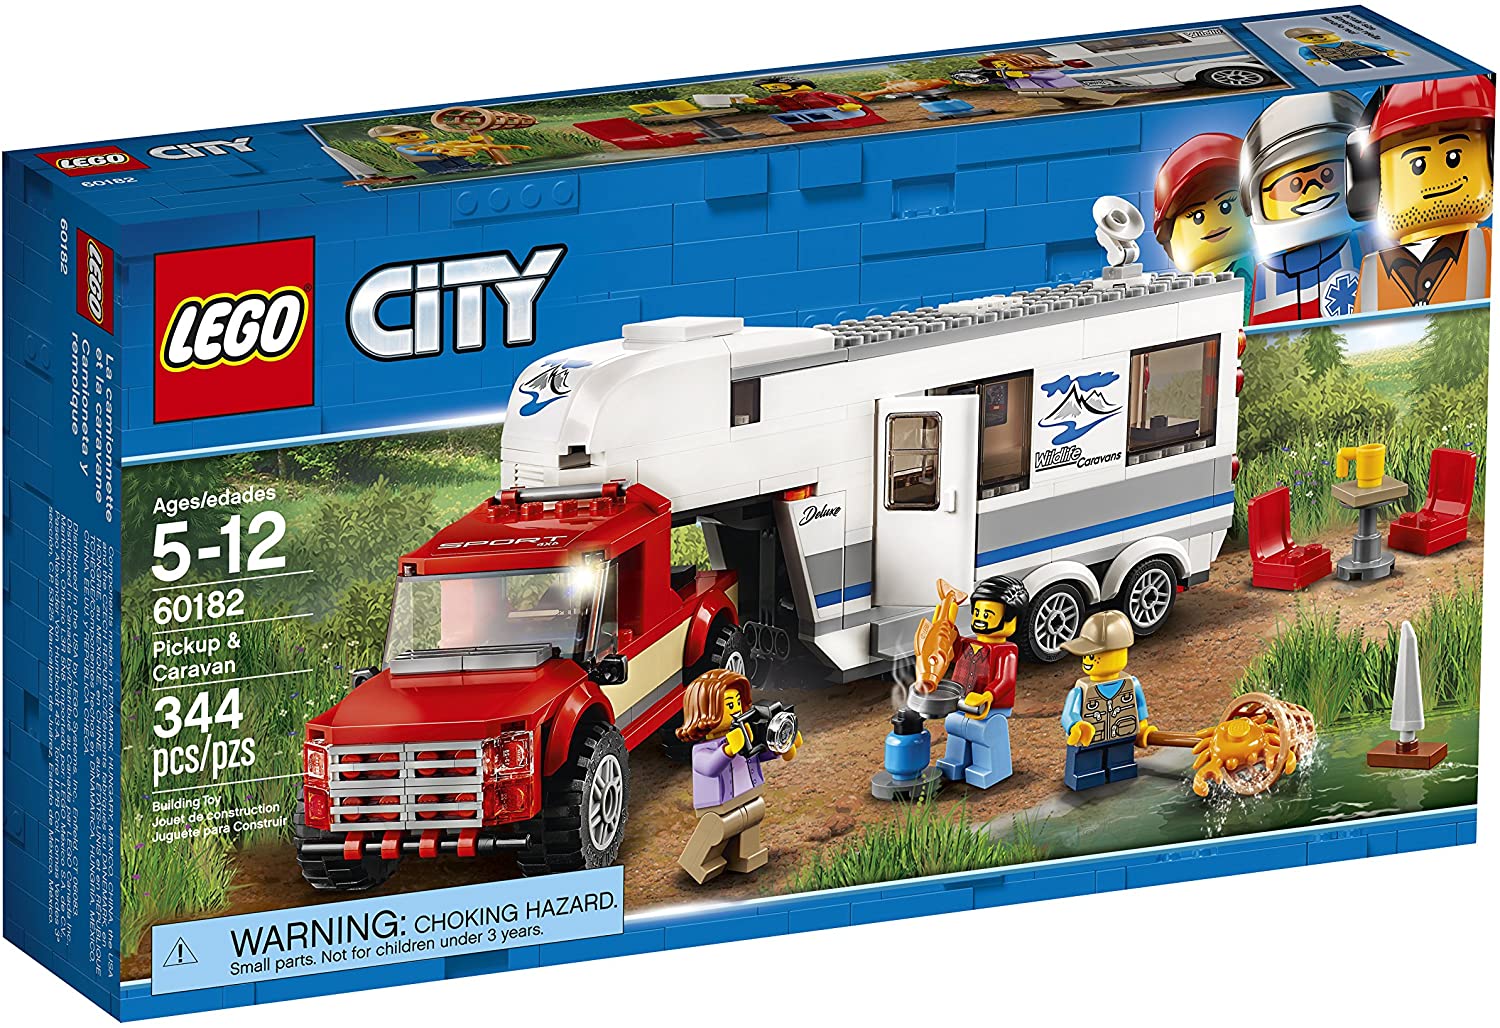 LEGO Ages 5 To 12 City Great Vehicles Pickup And Caravan Toy Of 344 Piece Sets